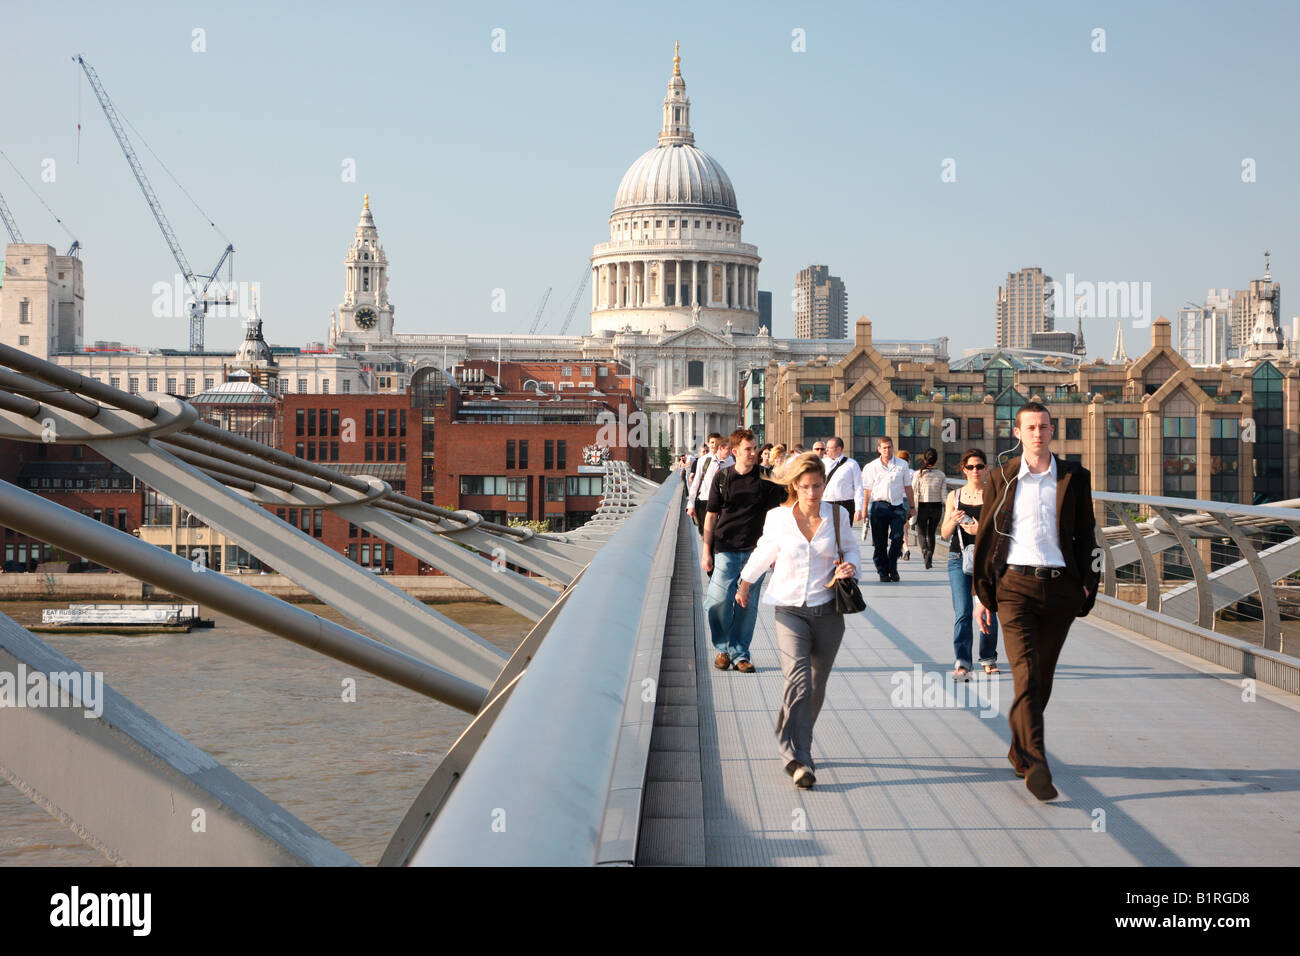 View towards St. Paul's Cathedral from Gateshead Millennium Bridge, London, England, Great Britain, Europe Stock Photo